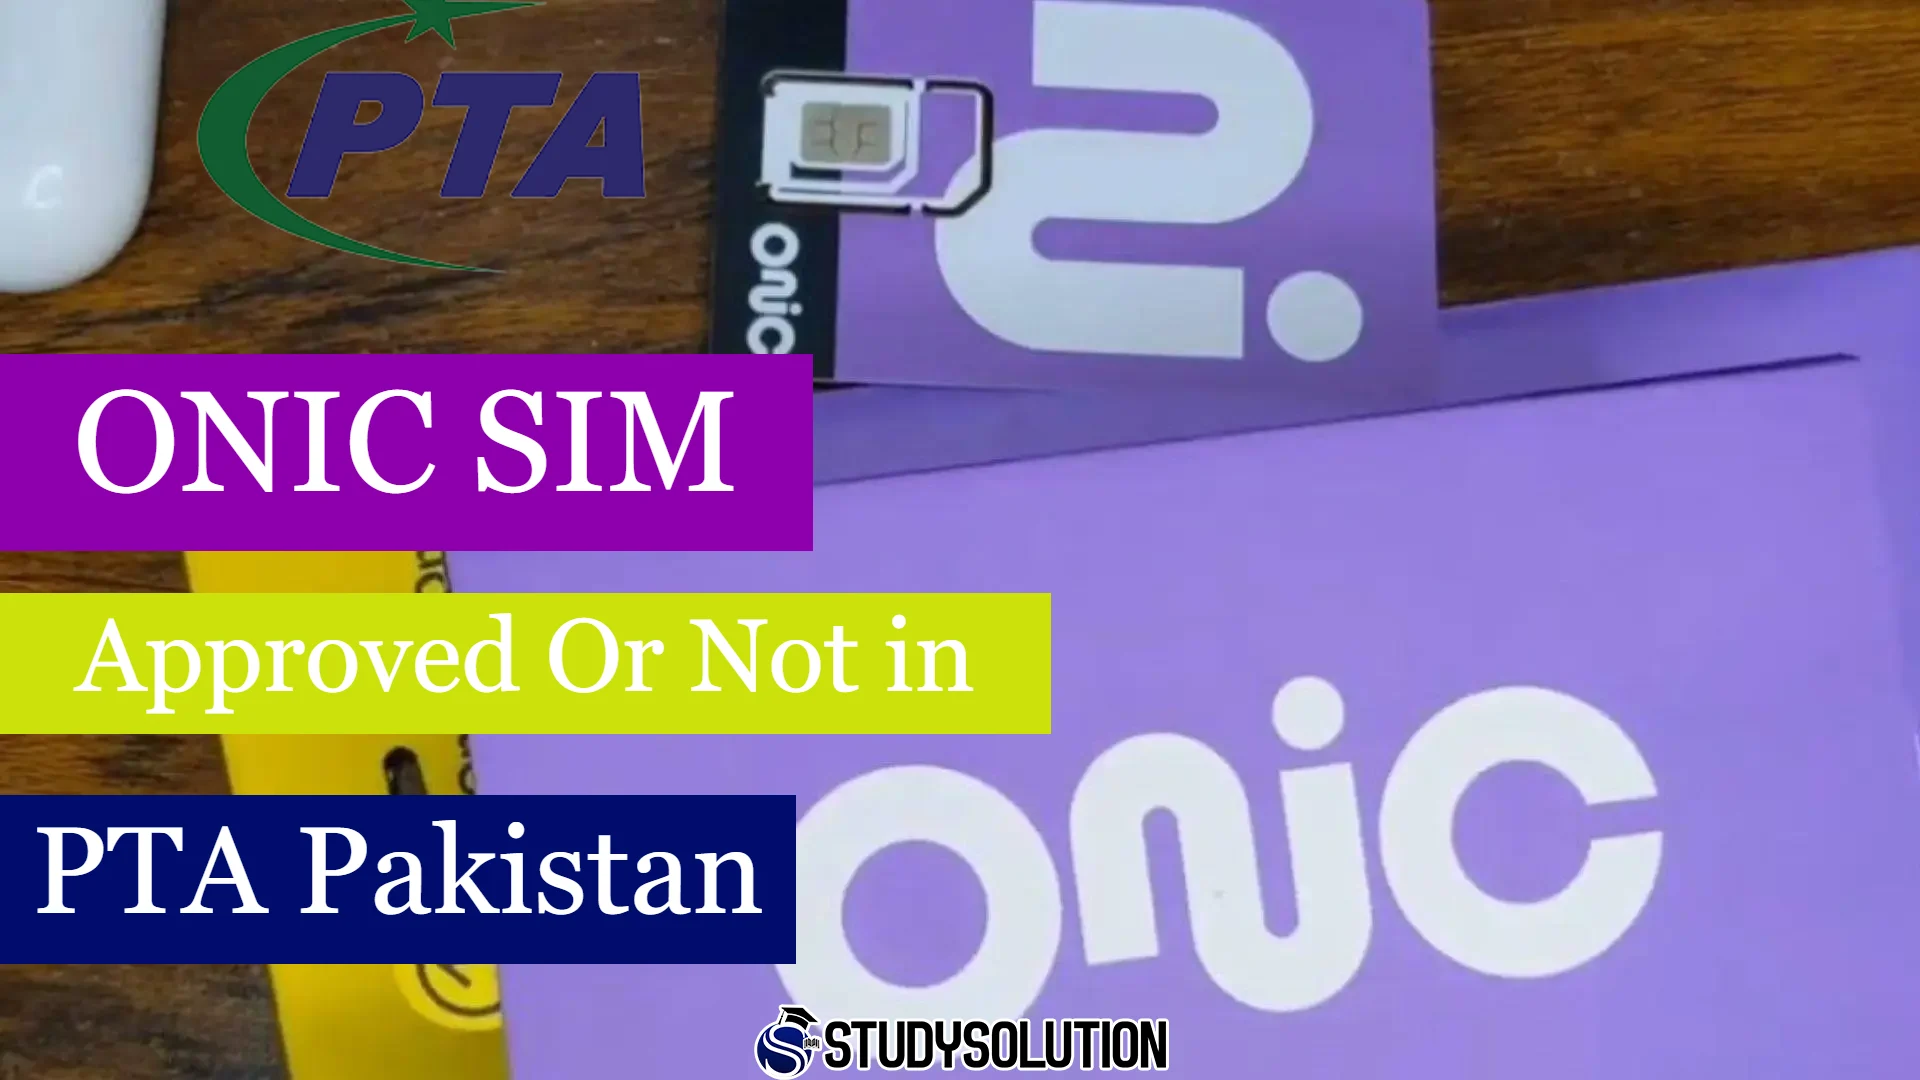 ONIC Sim is Approved Or Not in PTA Pakistan